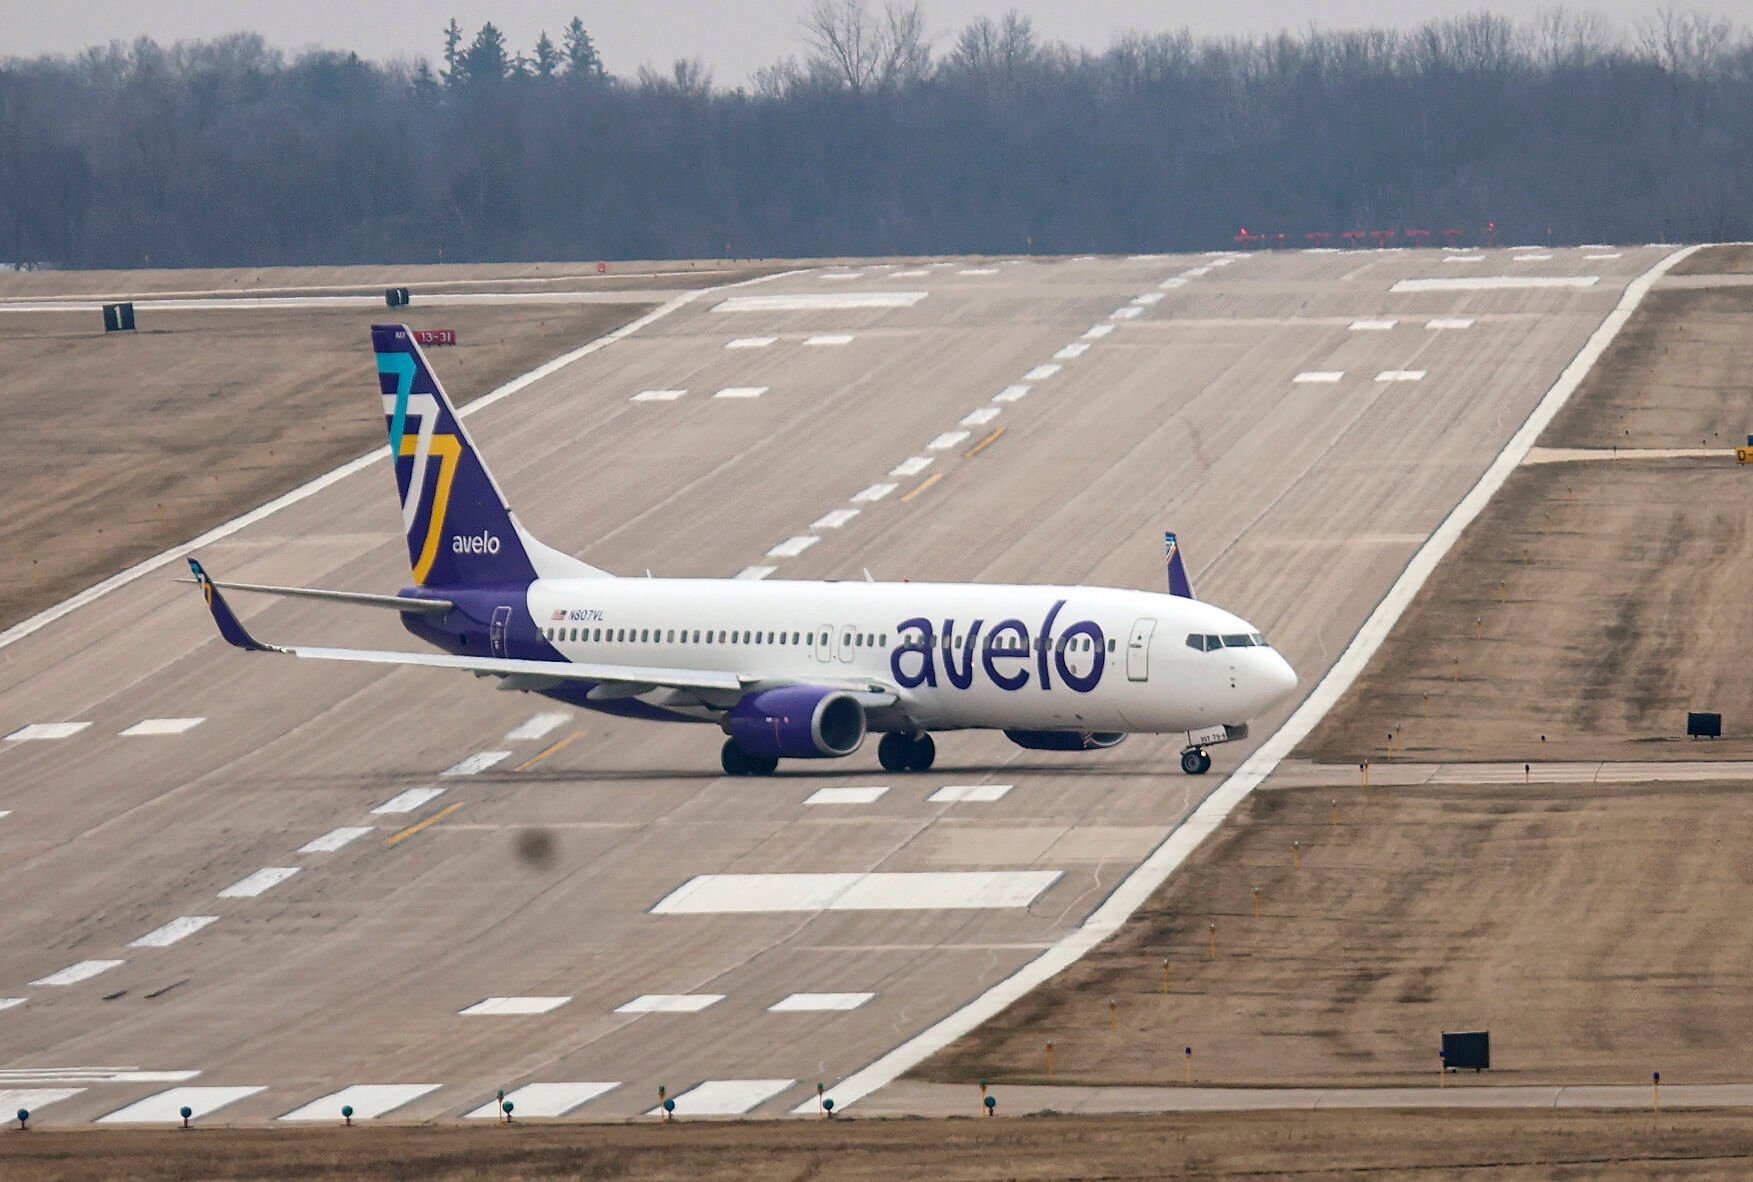 An Avelo Airlines jet taxis down the runway after touching down at the Dubuque Regional Airport for the airlines inaugural flight out of Dubuque on Wednesday, March 22, 2023.    PHOTO CREDIT: Dave Kettering